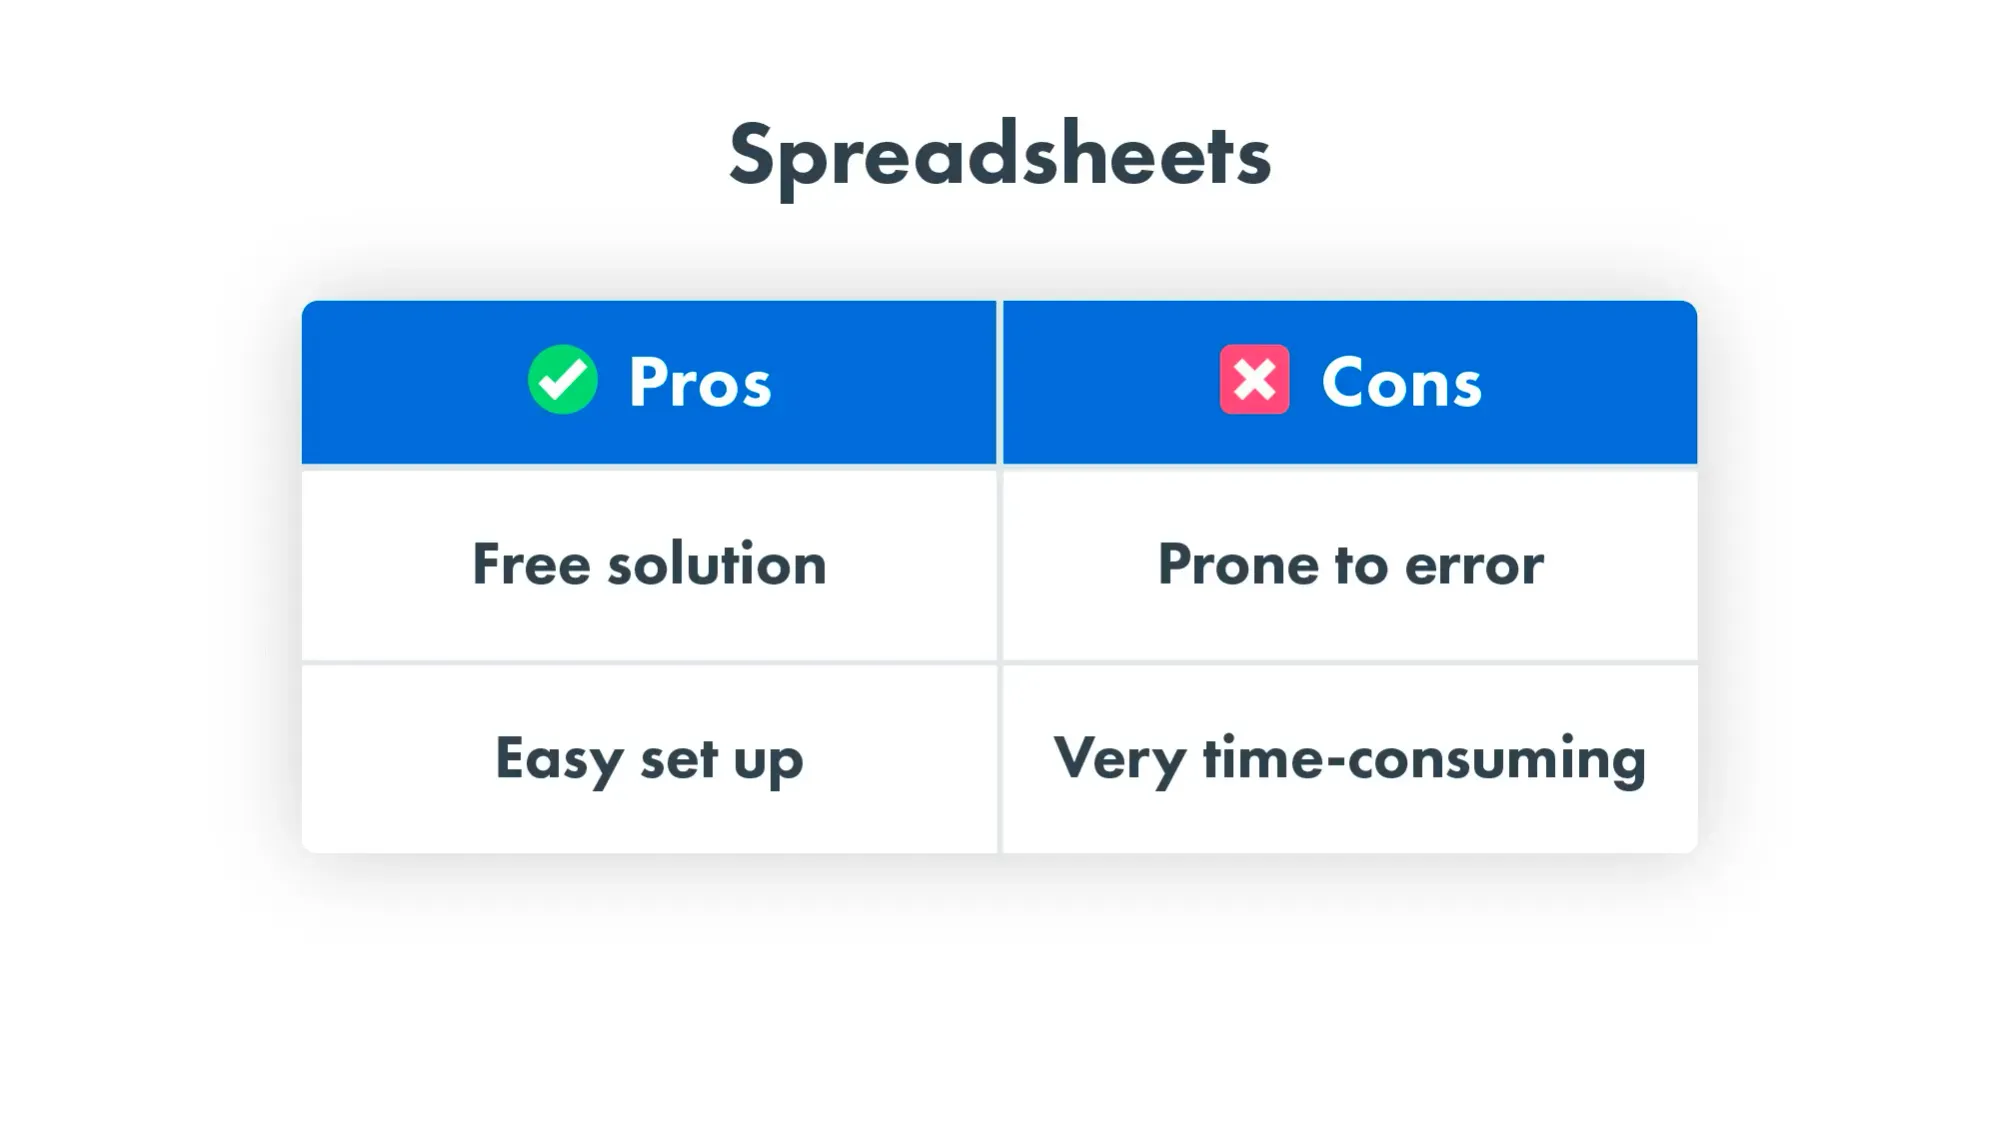 Spreadsheets' pros and cons: they are free but time-consuming to manage